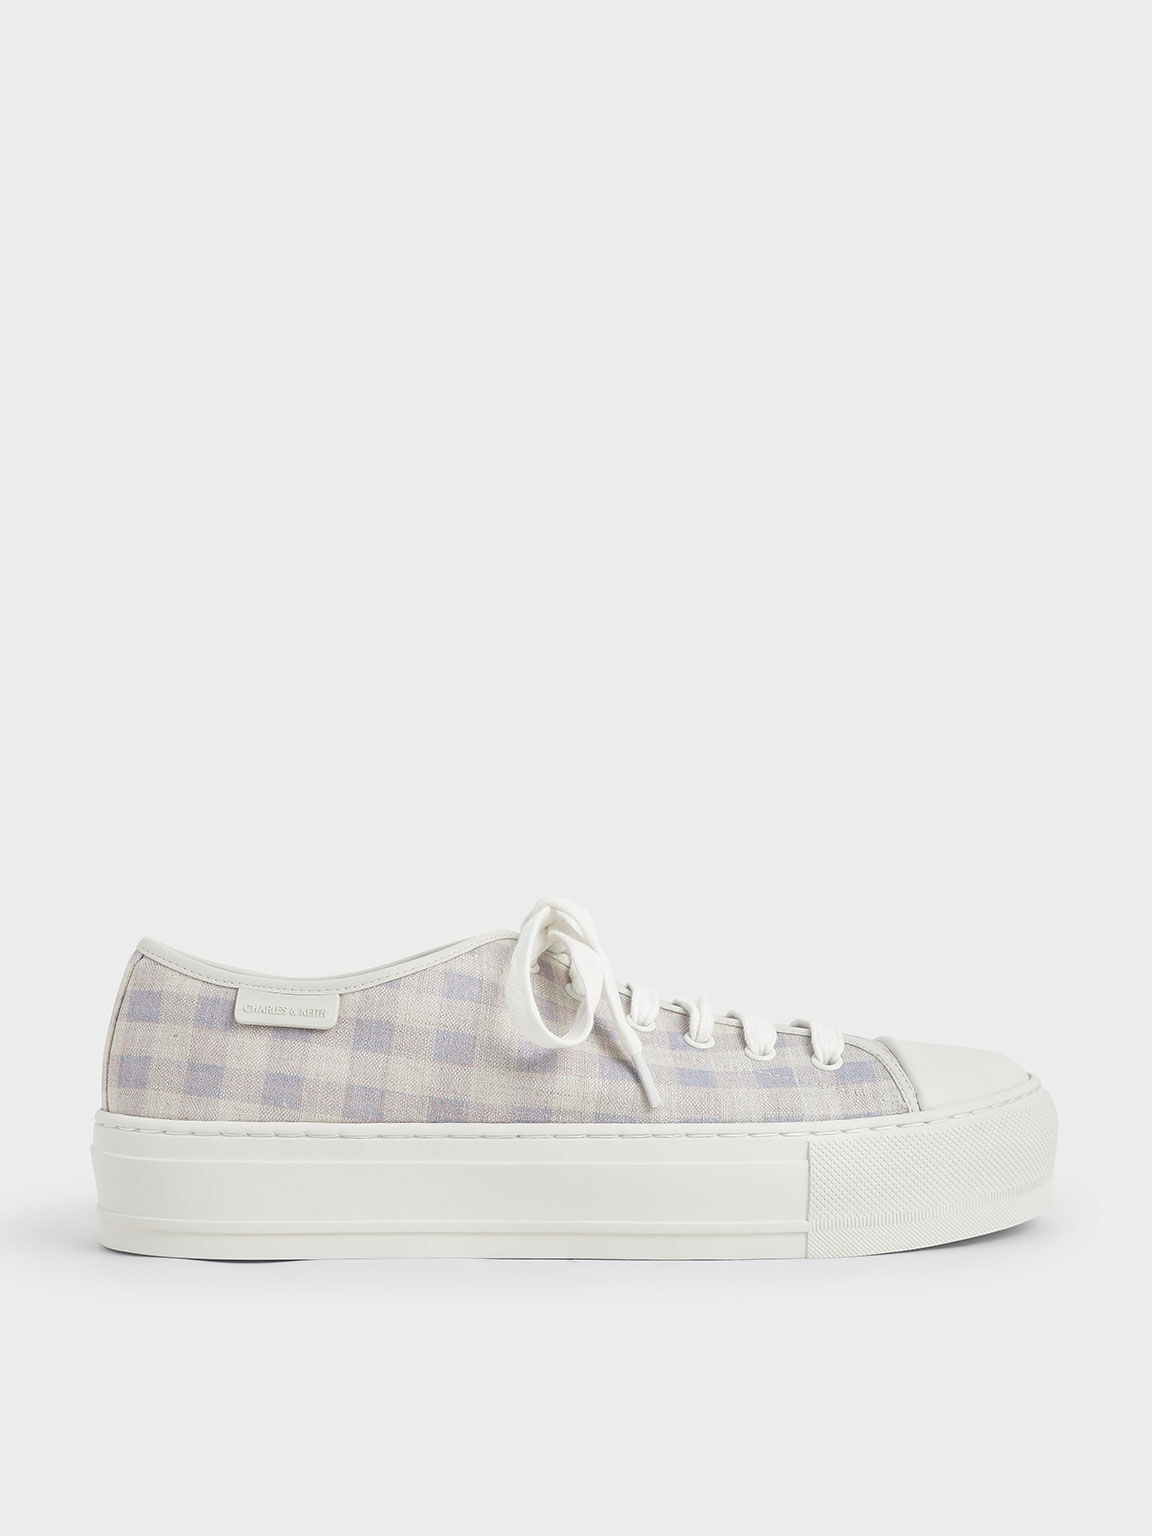 Woven Gingham Sneakers